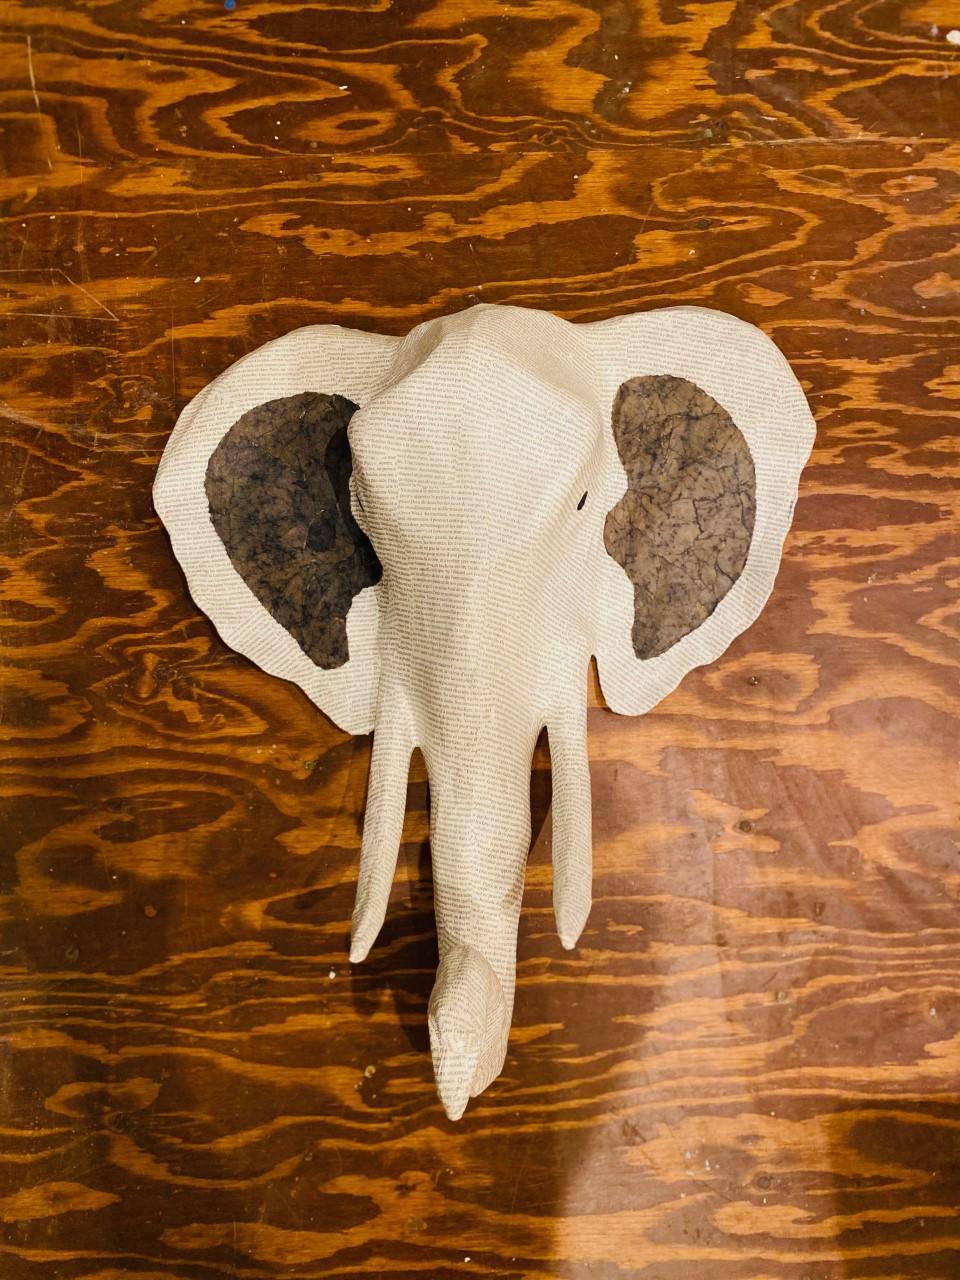 This beautiful papier mâché fake taxidermy sculpture was handmade in the Caribbean. It portrays the head of an elephant in the style of Classic taxidermy. Crafted from recycled materials and finished with prints from Honore’ de Balzac’s 19th century